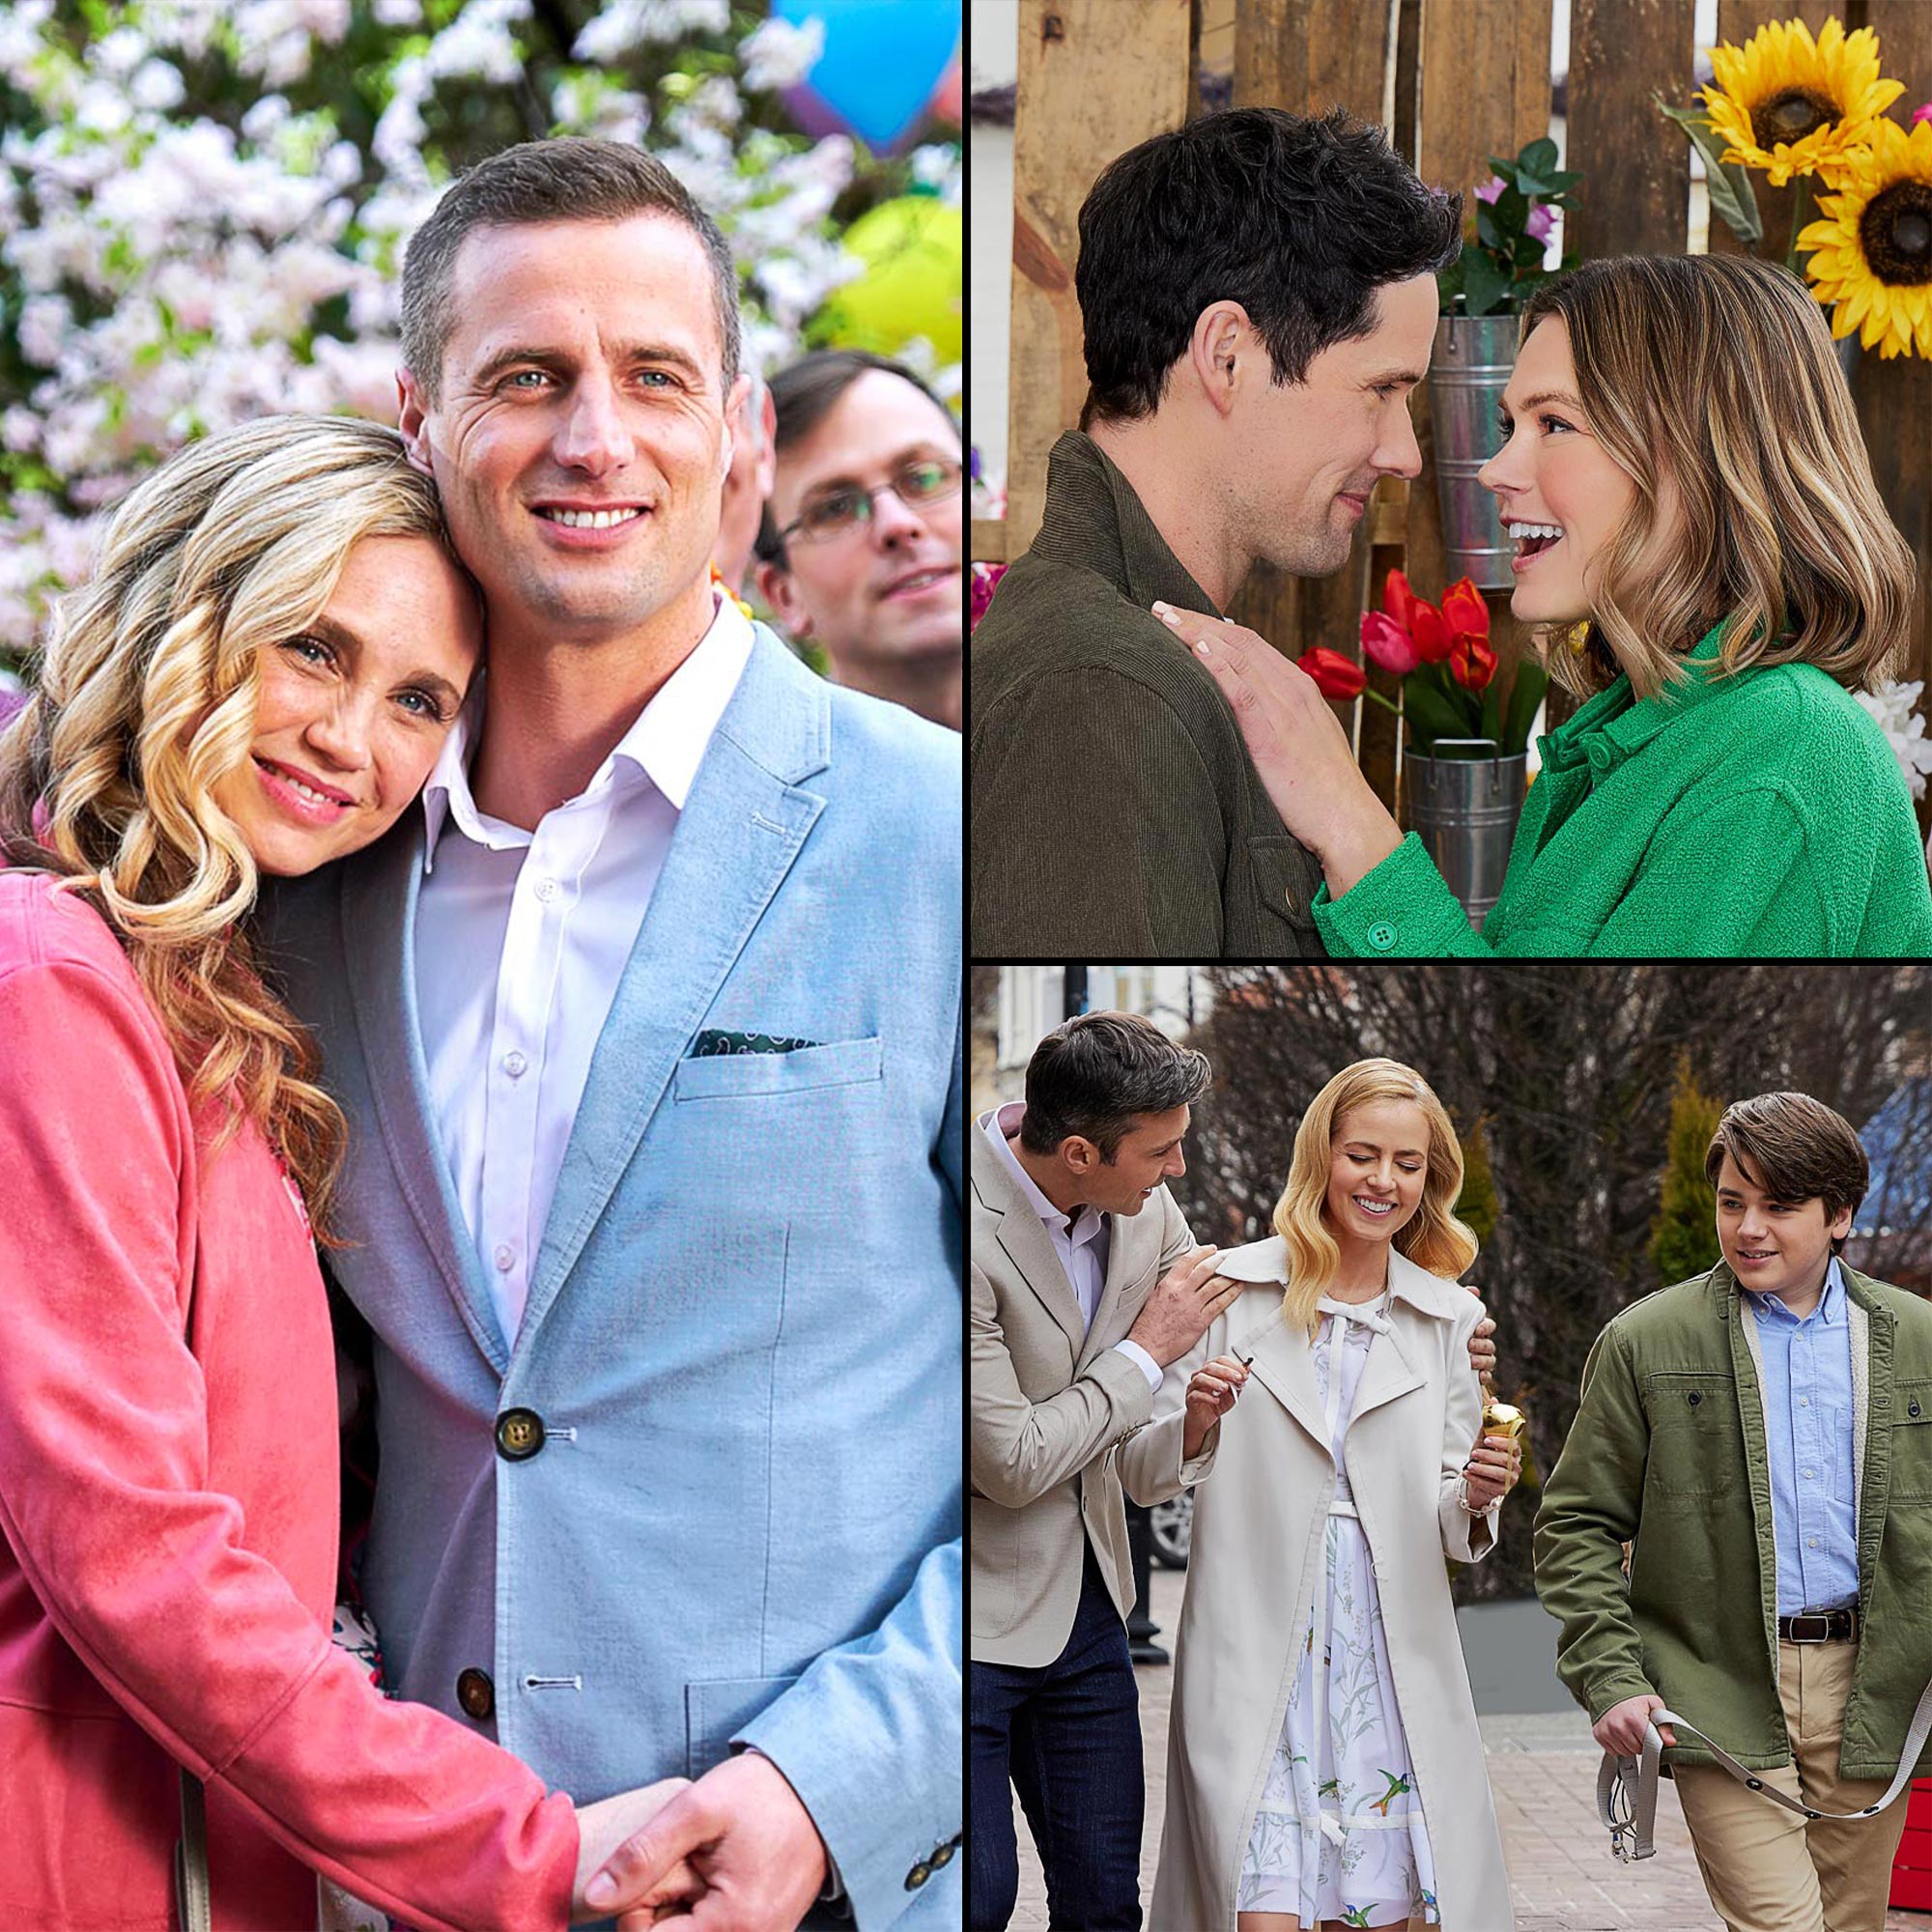 Hallmark Easter Movies Are Rare, But These Films Show the Holiday Some Love